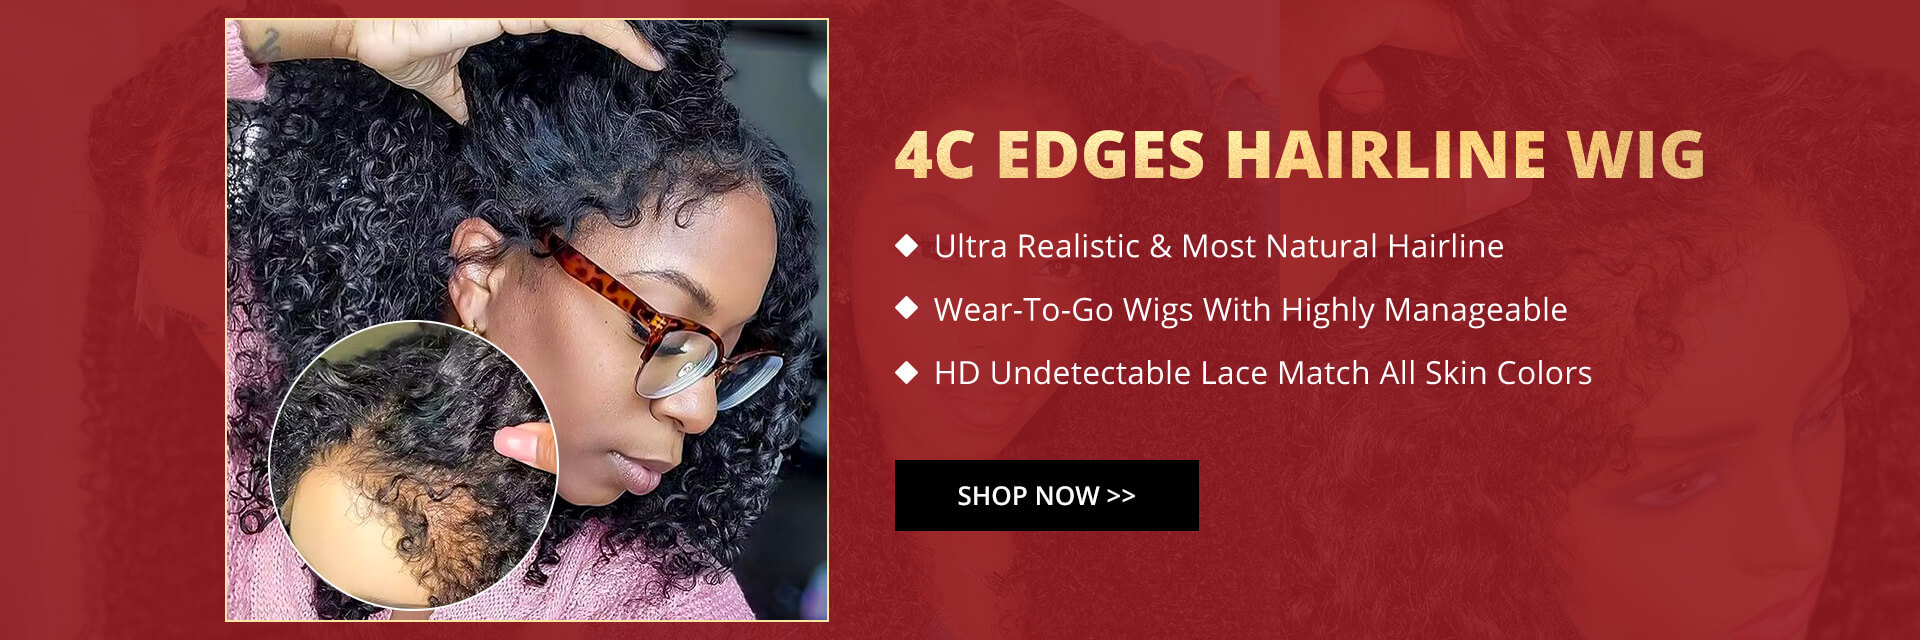 West kiss hair store offers 4c edges hairline wigs on sale